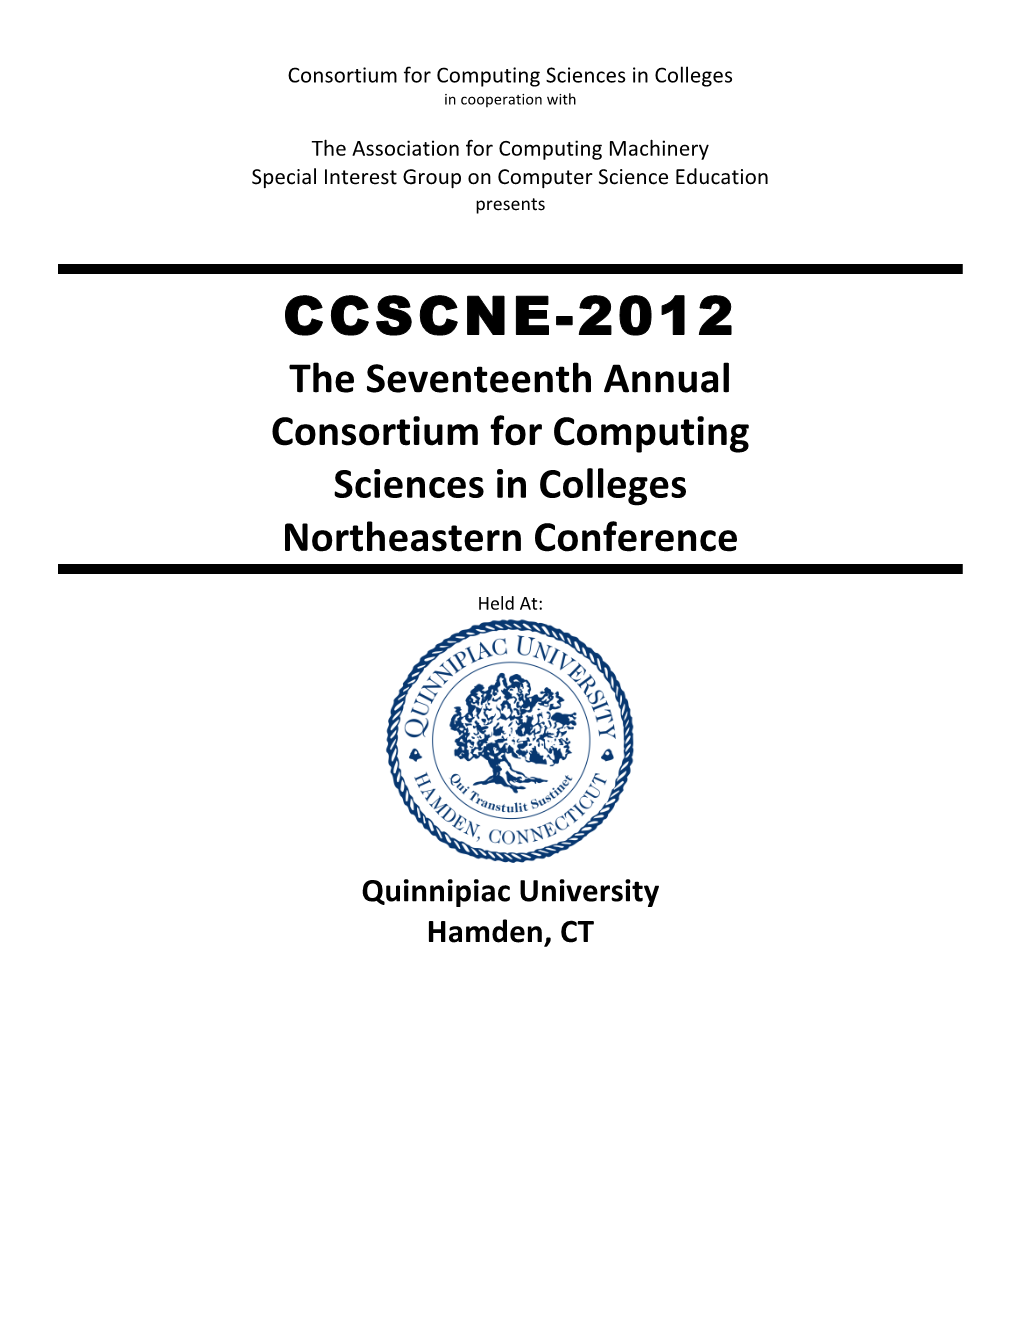 CCSCNE-2012 the Seventeenth Annual Consortium for Computing Sciences in Colleges Northeastern Conference